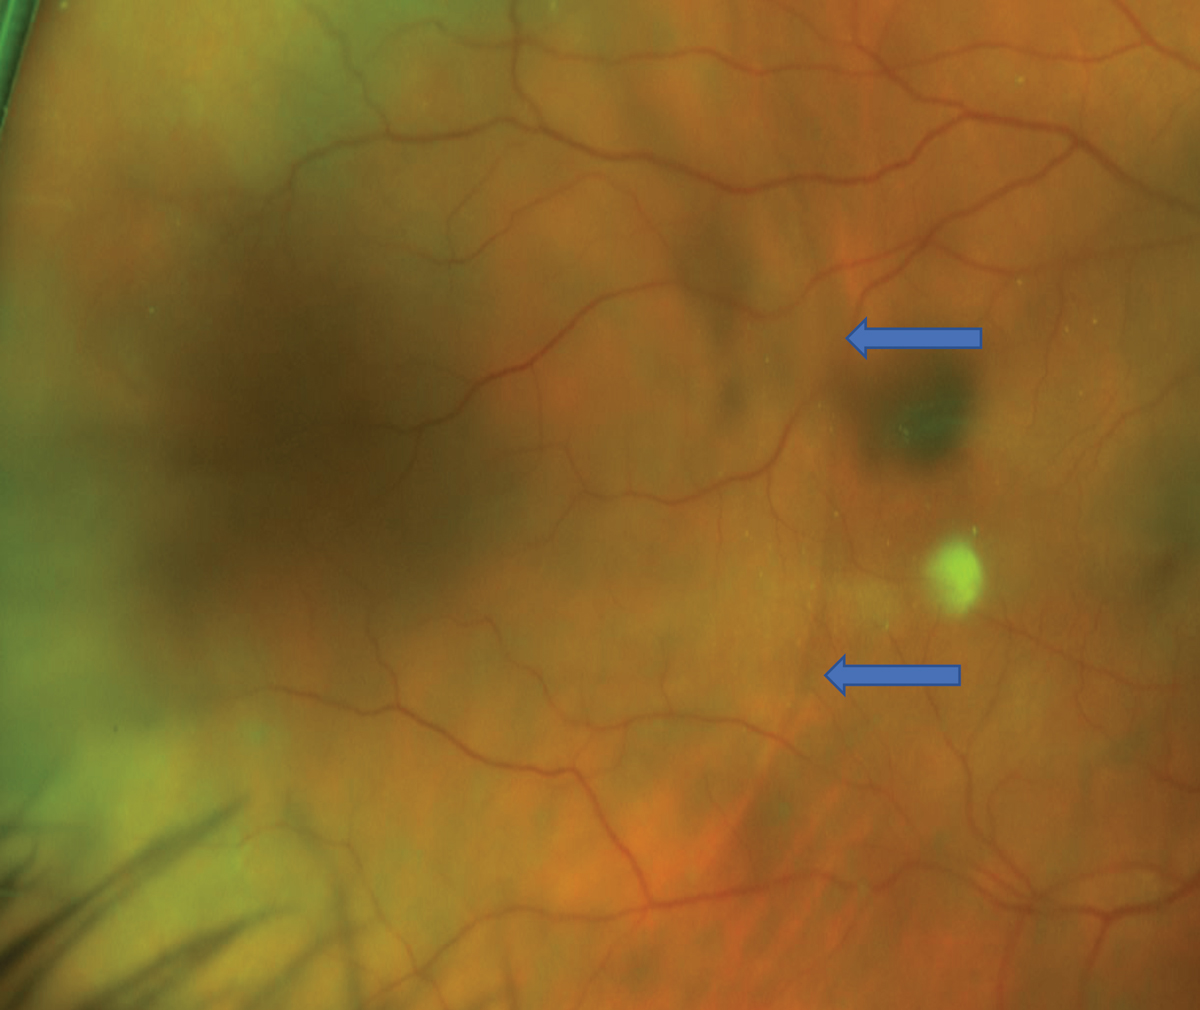 Fig. 3. Magnified view of the temporal retina OD one month prior to large retinal detachment. It reveals a circular border, possibly denoting a shallow retinal detachment (blue arrows). 